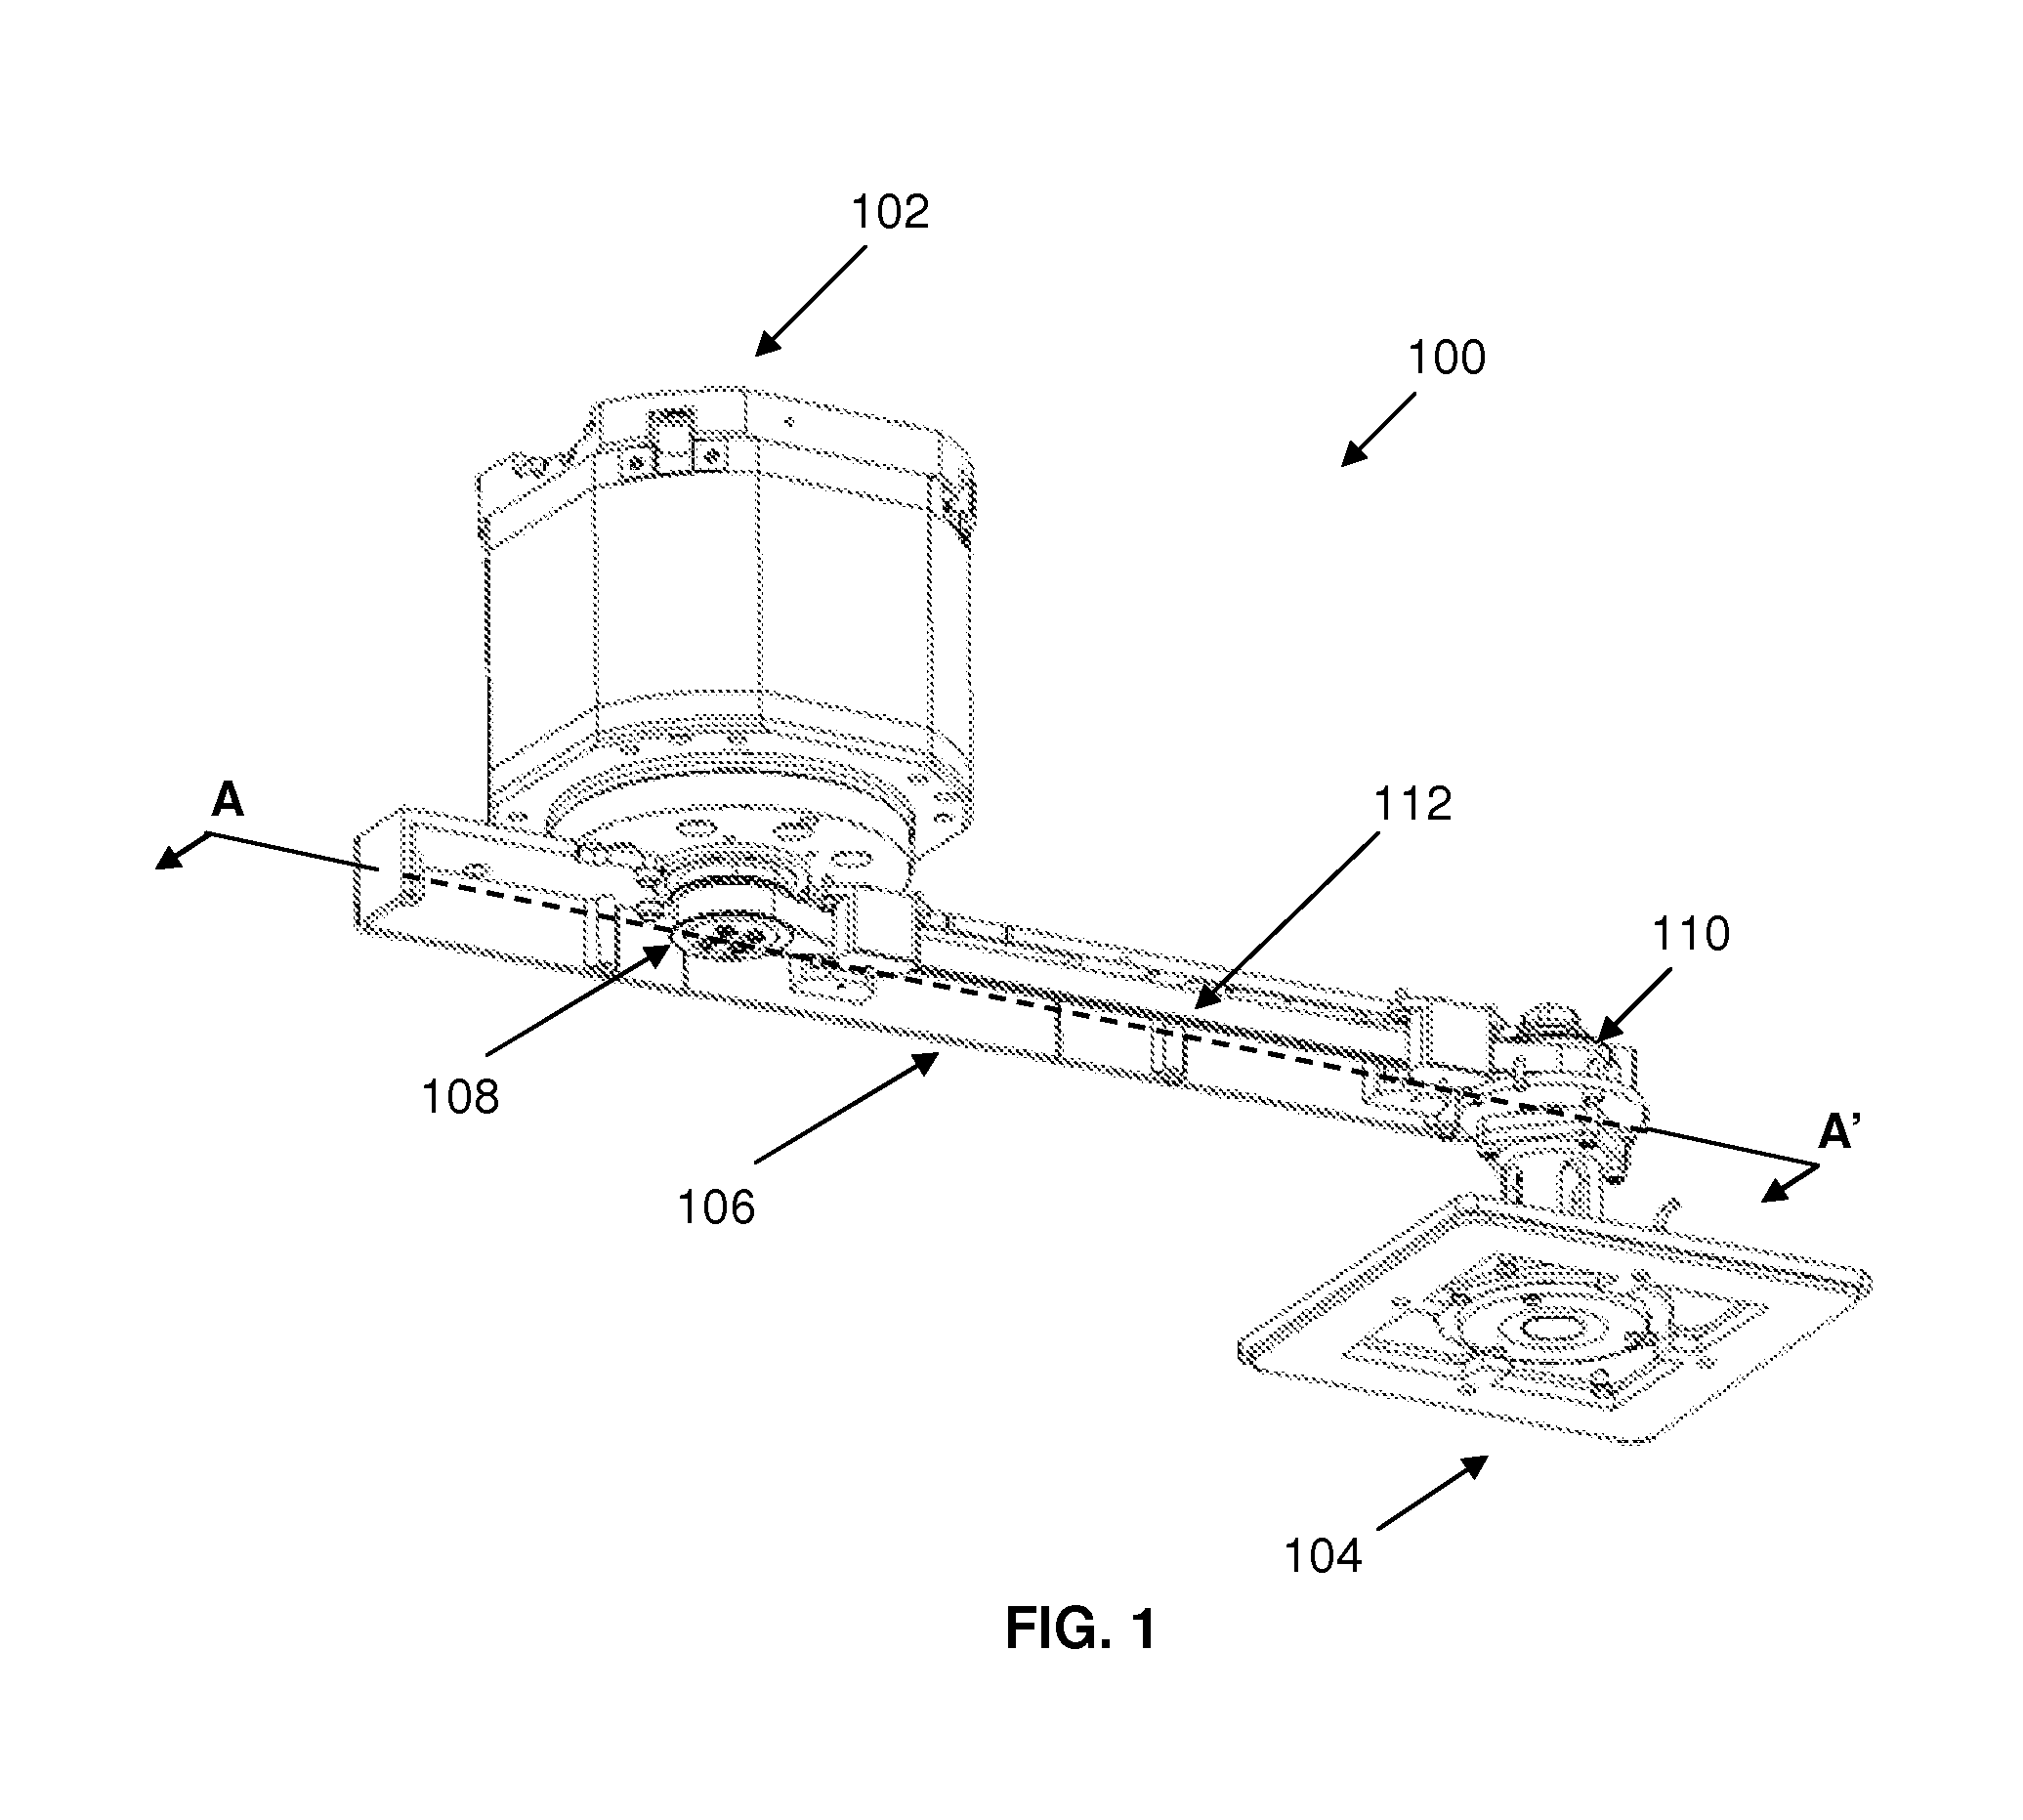 Apparatus for transferring a solar wafer or solar cell during its fabrication